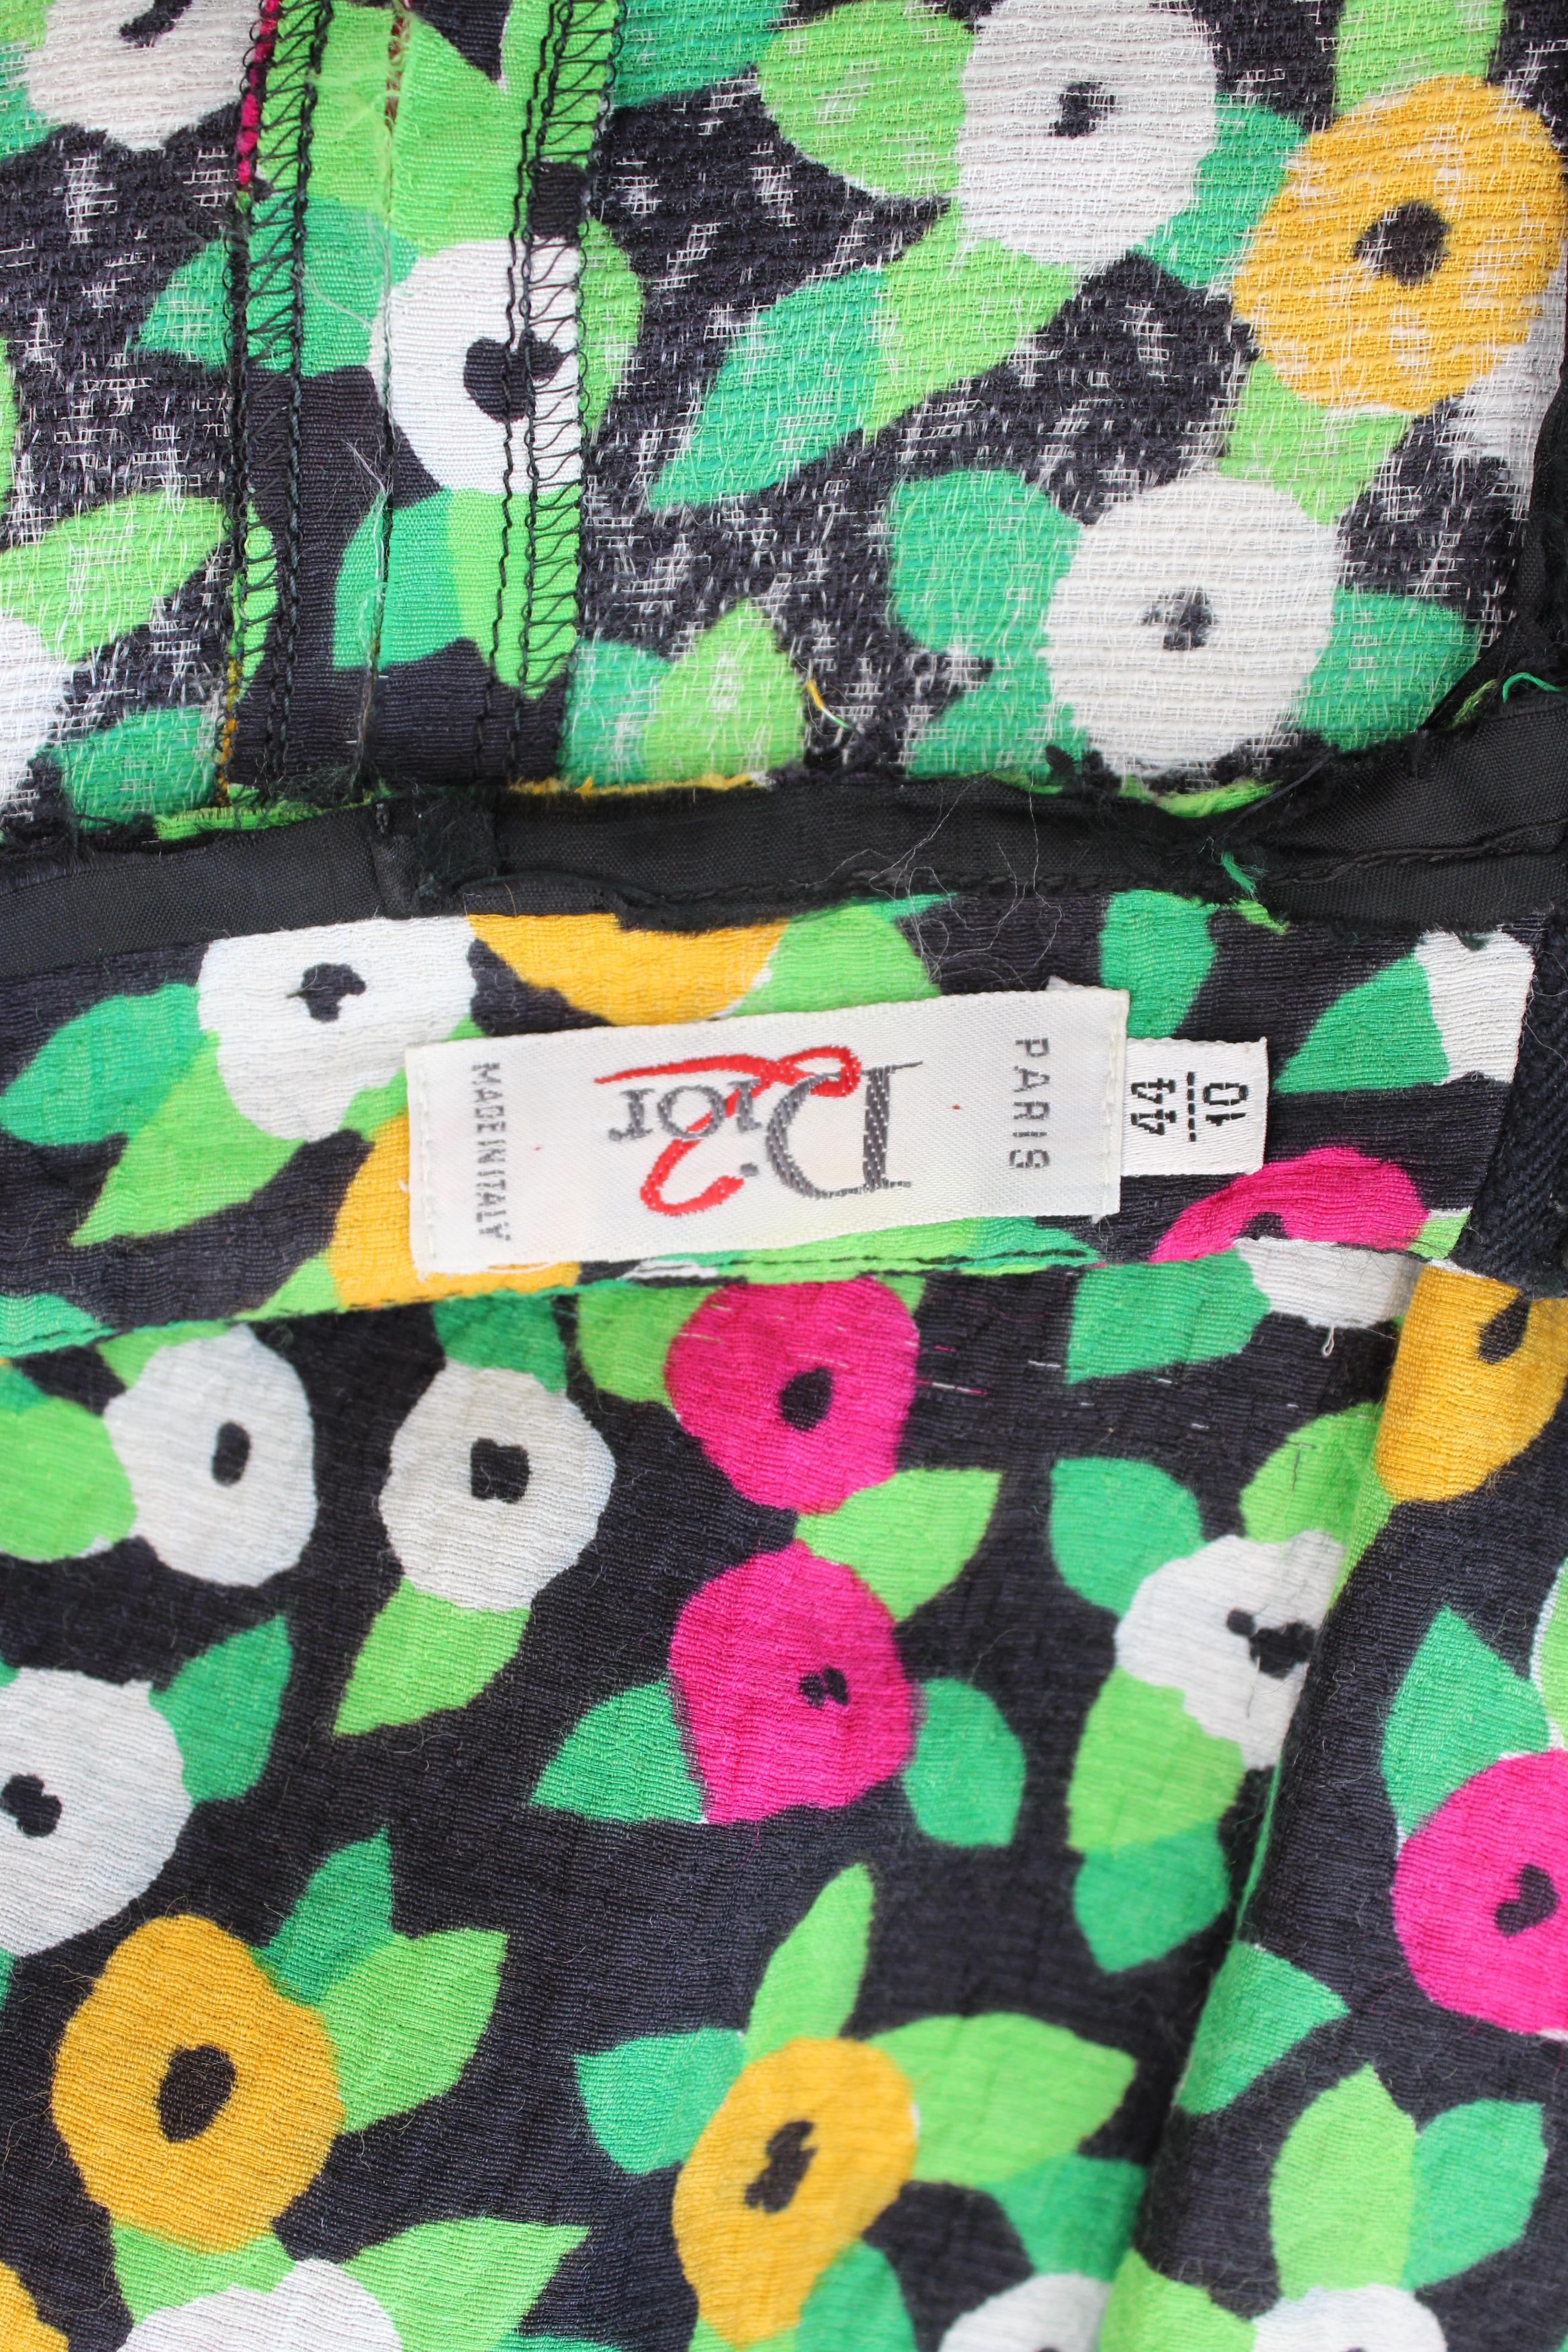 Dior 2 vintage 90s dress. Sheath dress, knee length, sweetheart neckline. Black, green and fuchsia color with floral pattern. Cotton fabric. Zip closure along the back. Made in Italy.

Condition: Excellent

Article used few times, it remains in its